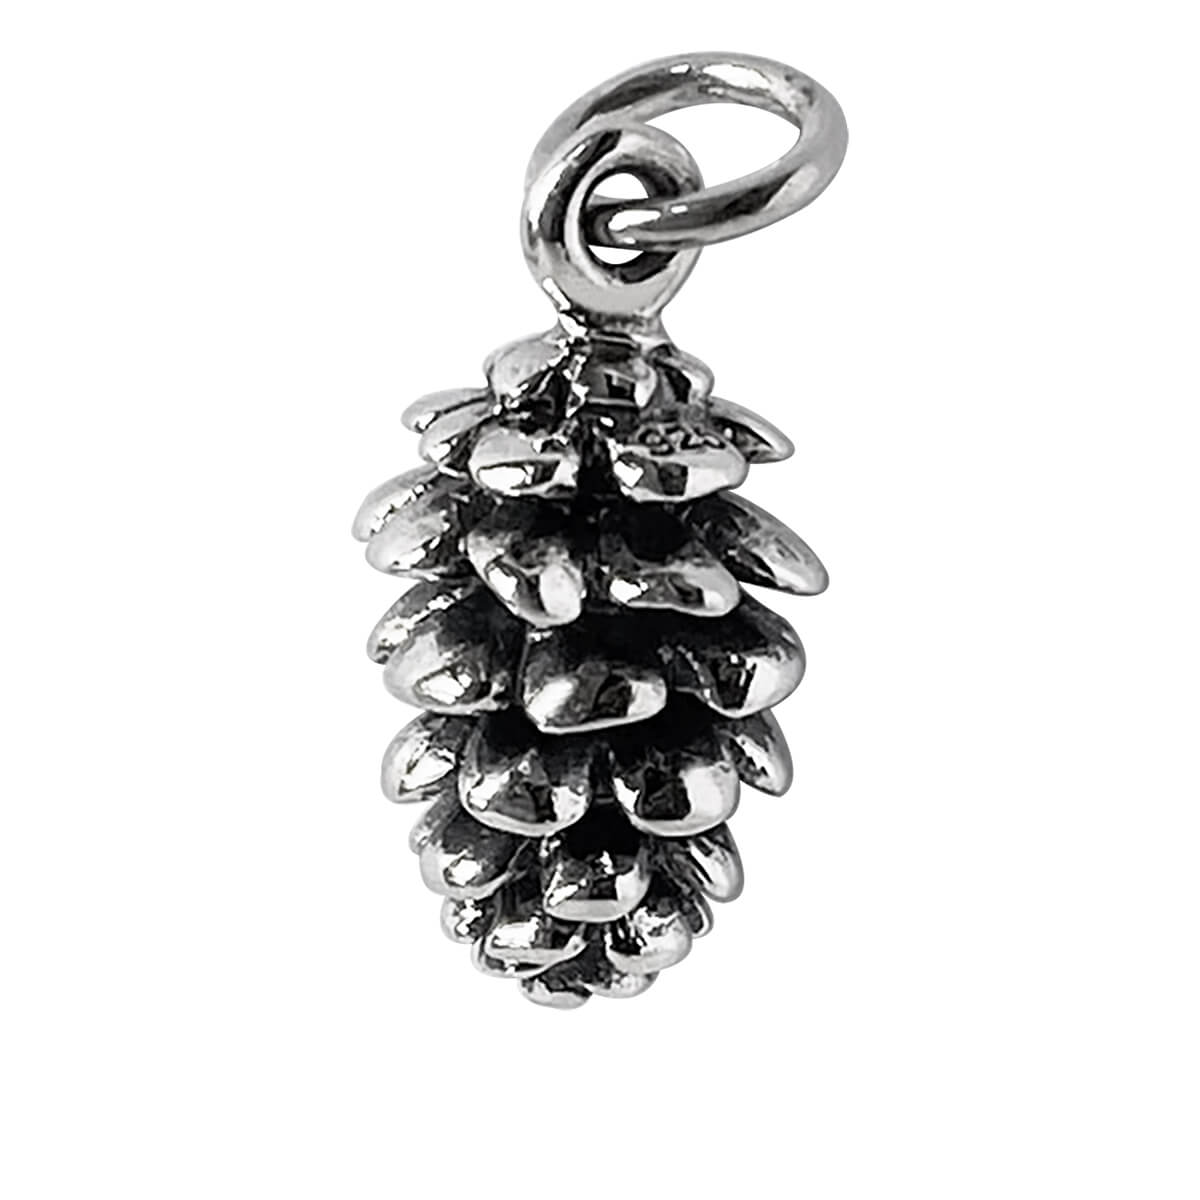 Pine cone charm sterling silver woodland pendant